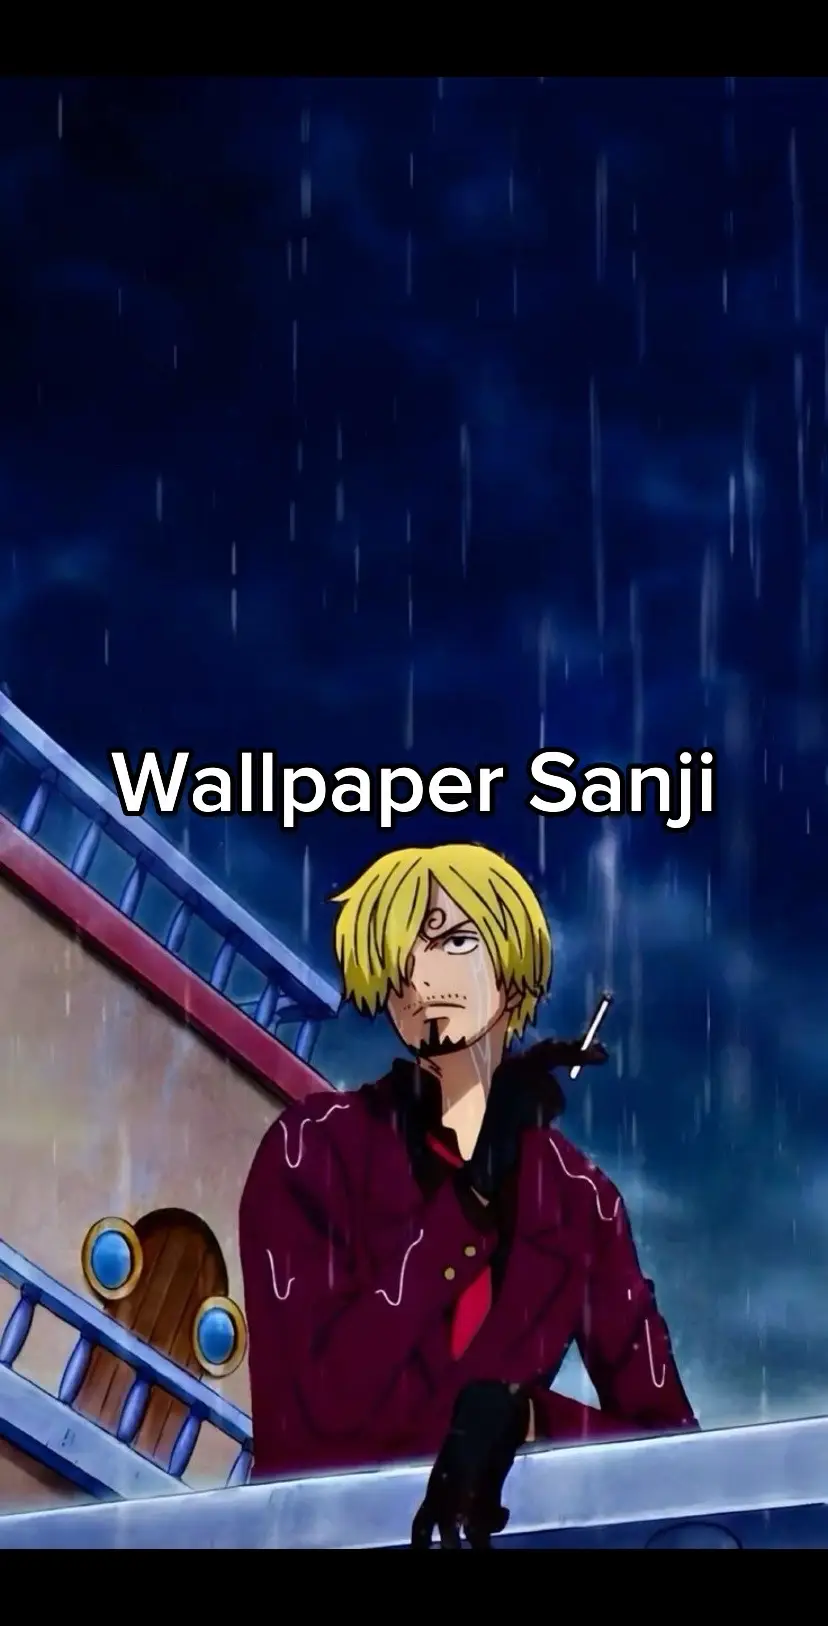 #sanji #onepiece #wallpaper #wallpapers #foryou #fyp #pourtoi 